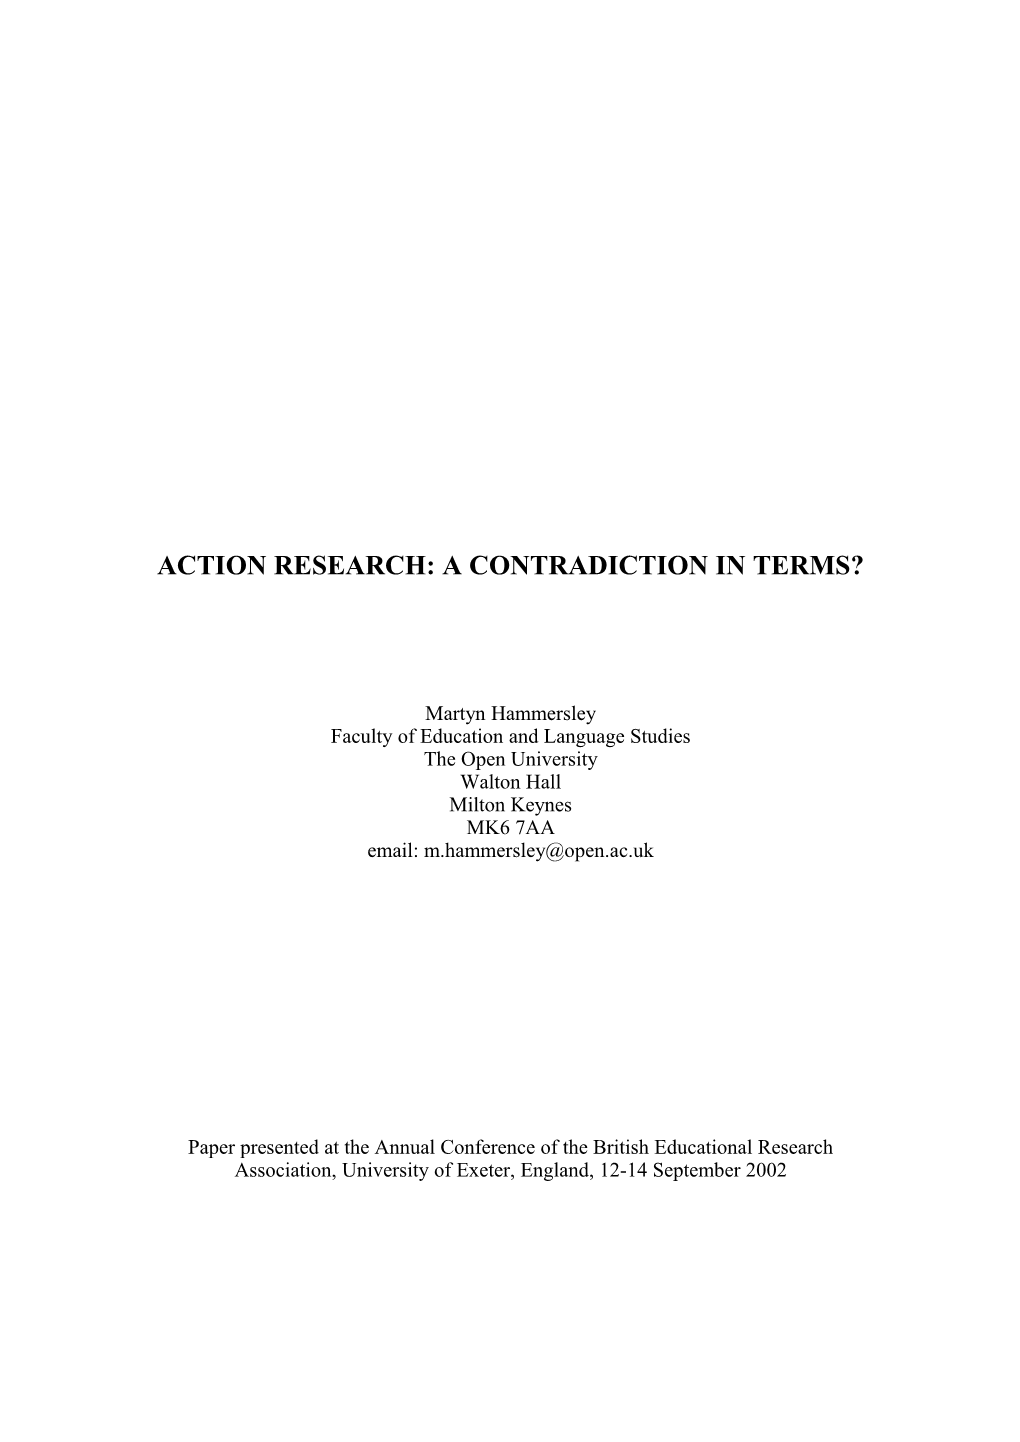 Action Research: a Contradiction in Terms?